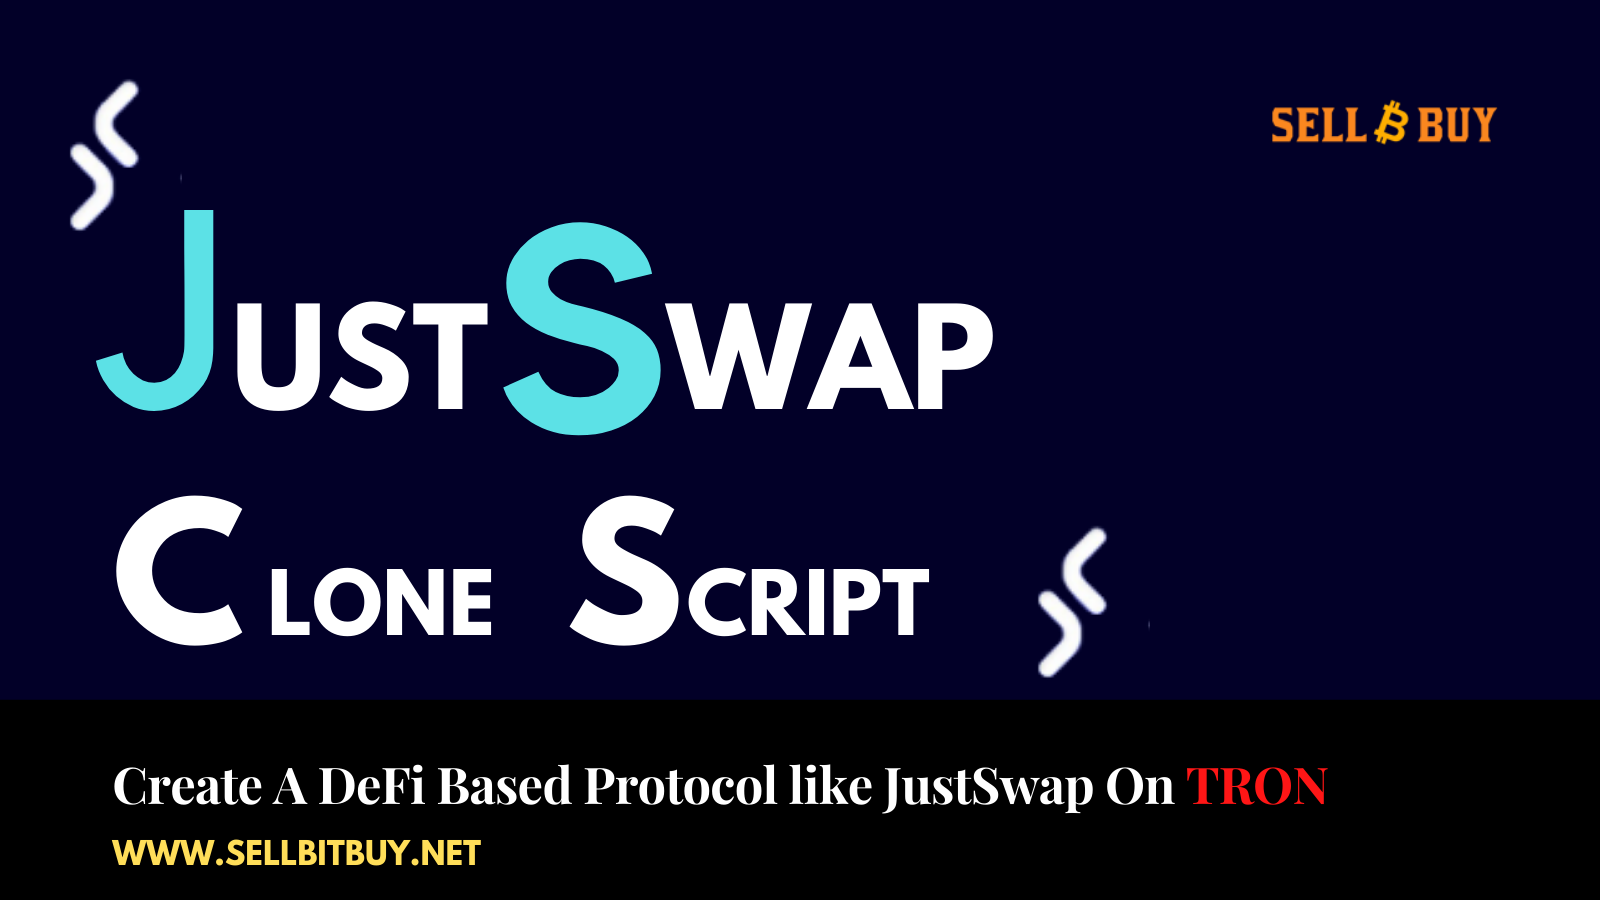 JustSwap Clone Script - To Create a Decentralized Protocol Like JustSwap On TRON